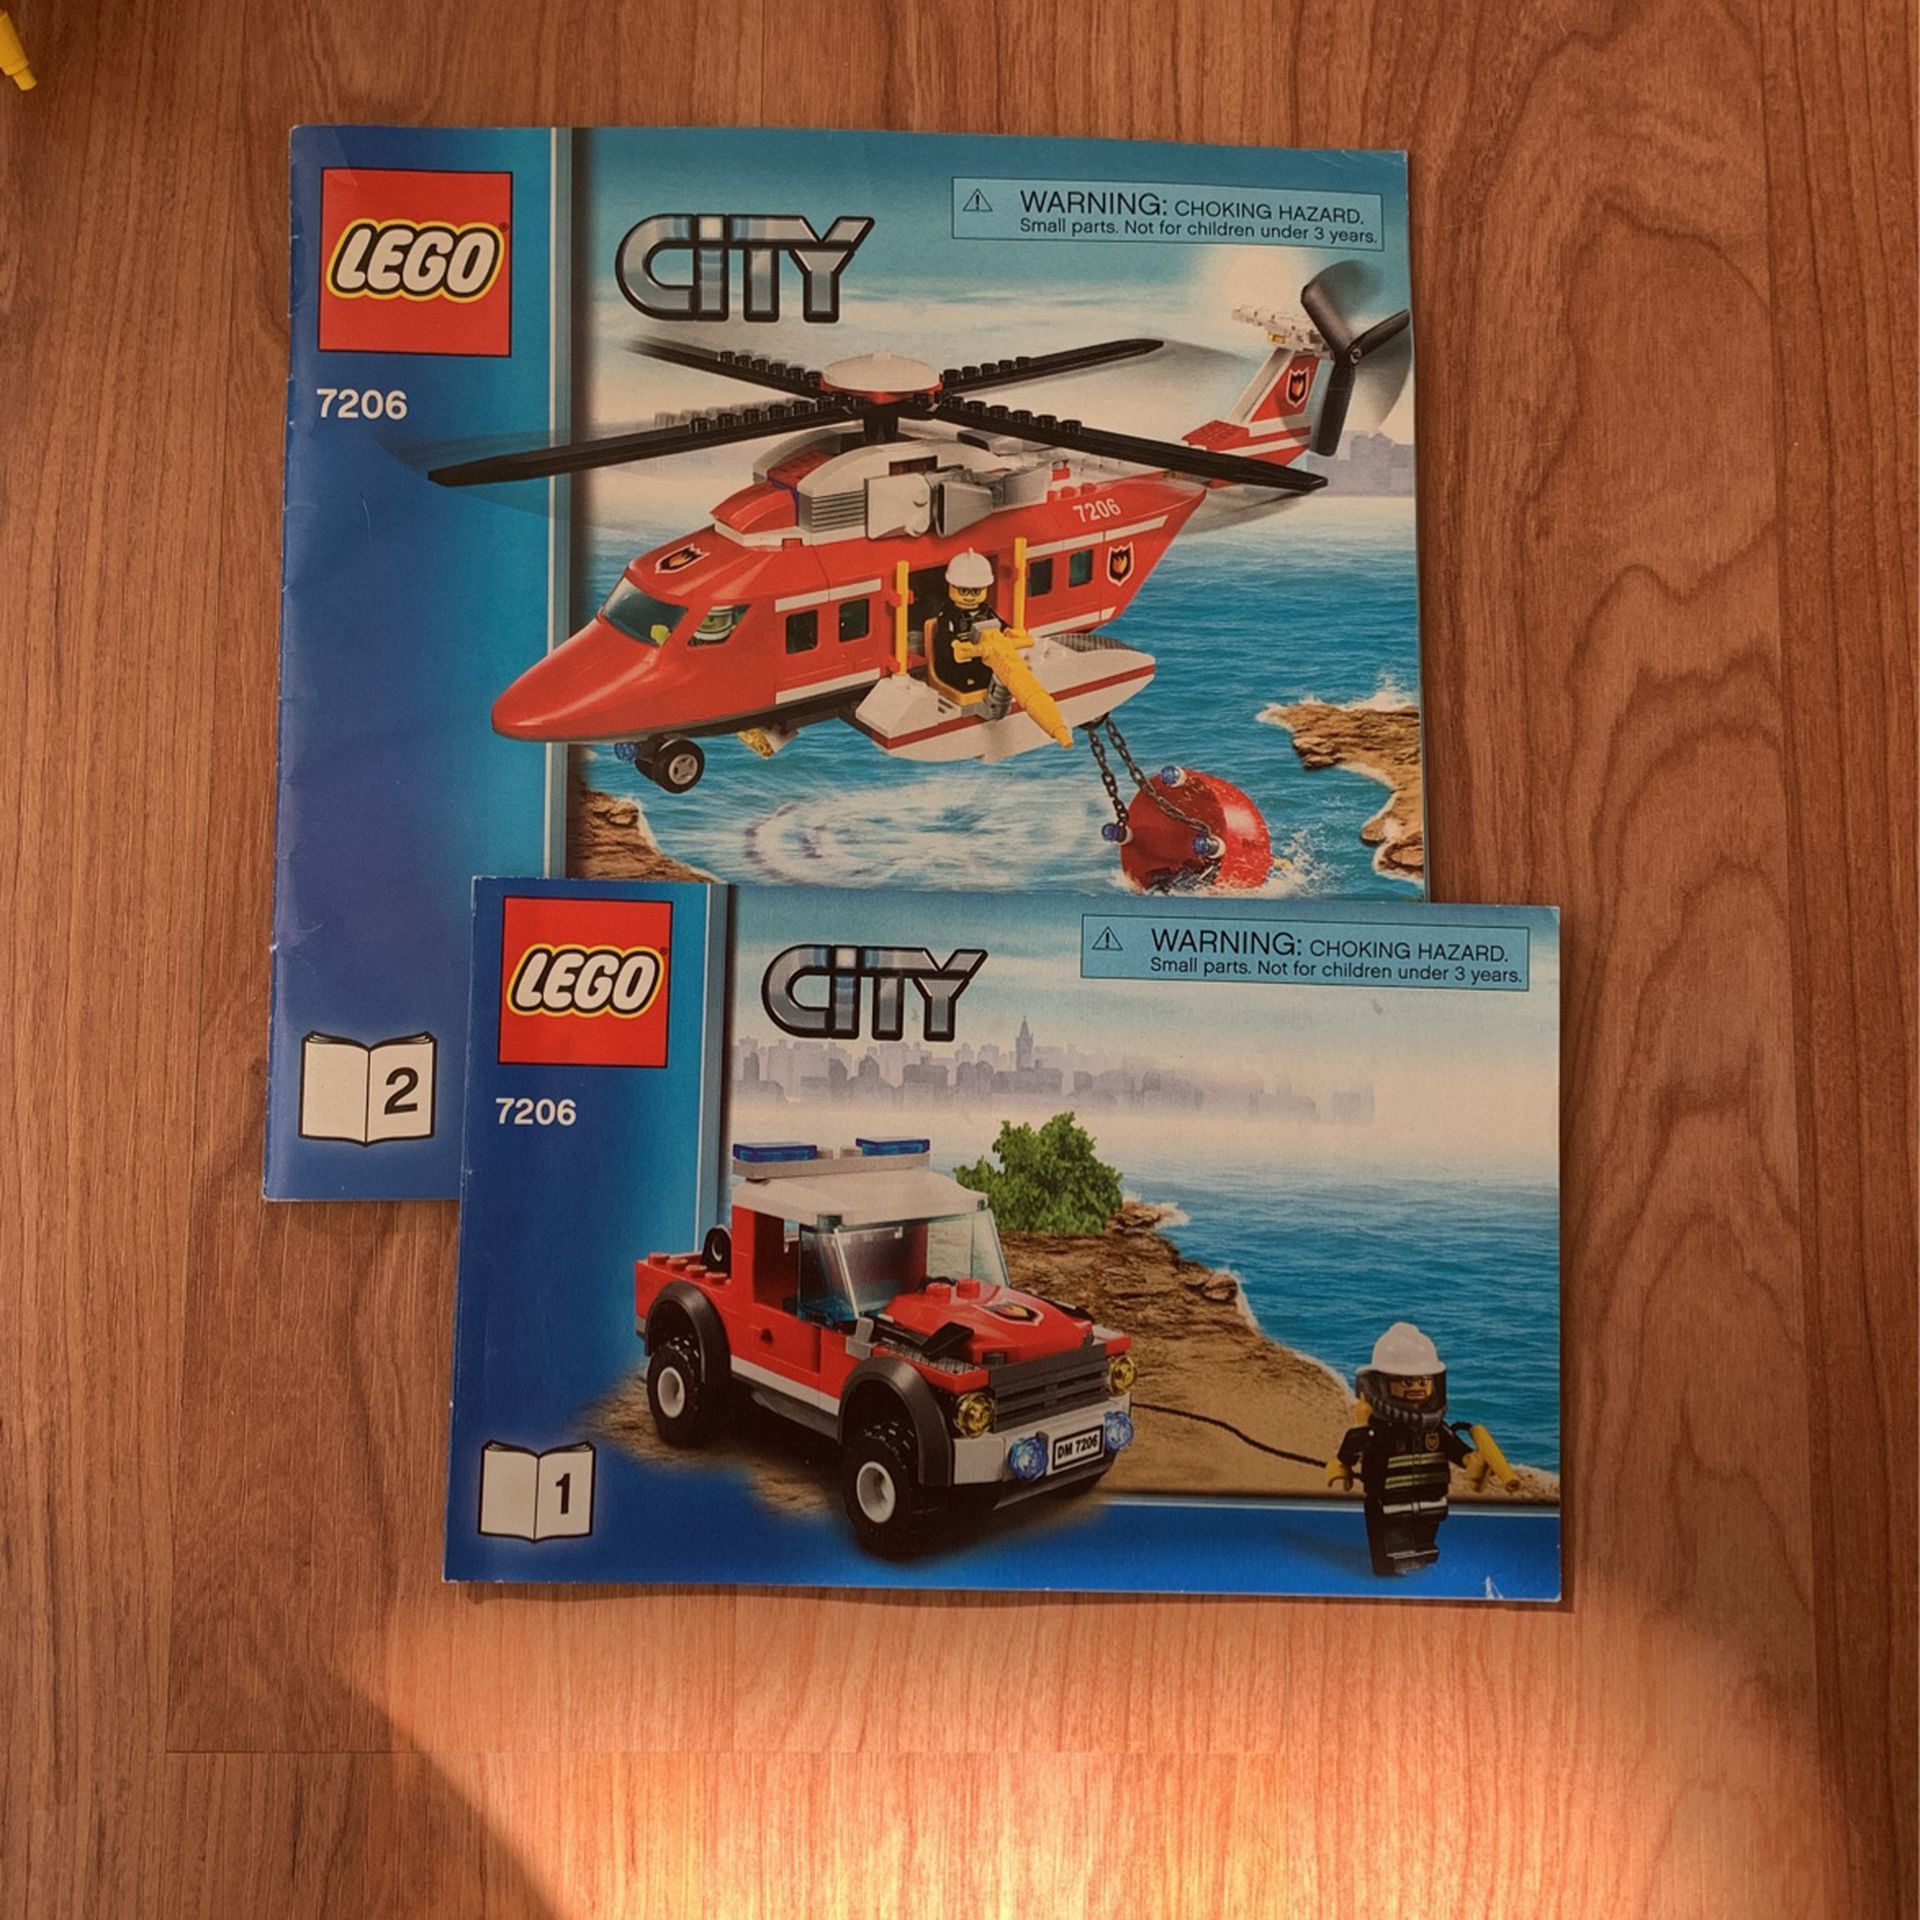 Lego City 7206 Fire Helicopter for Sale in Fishers, OfferUp